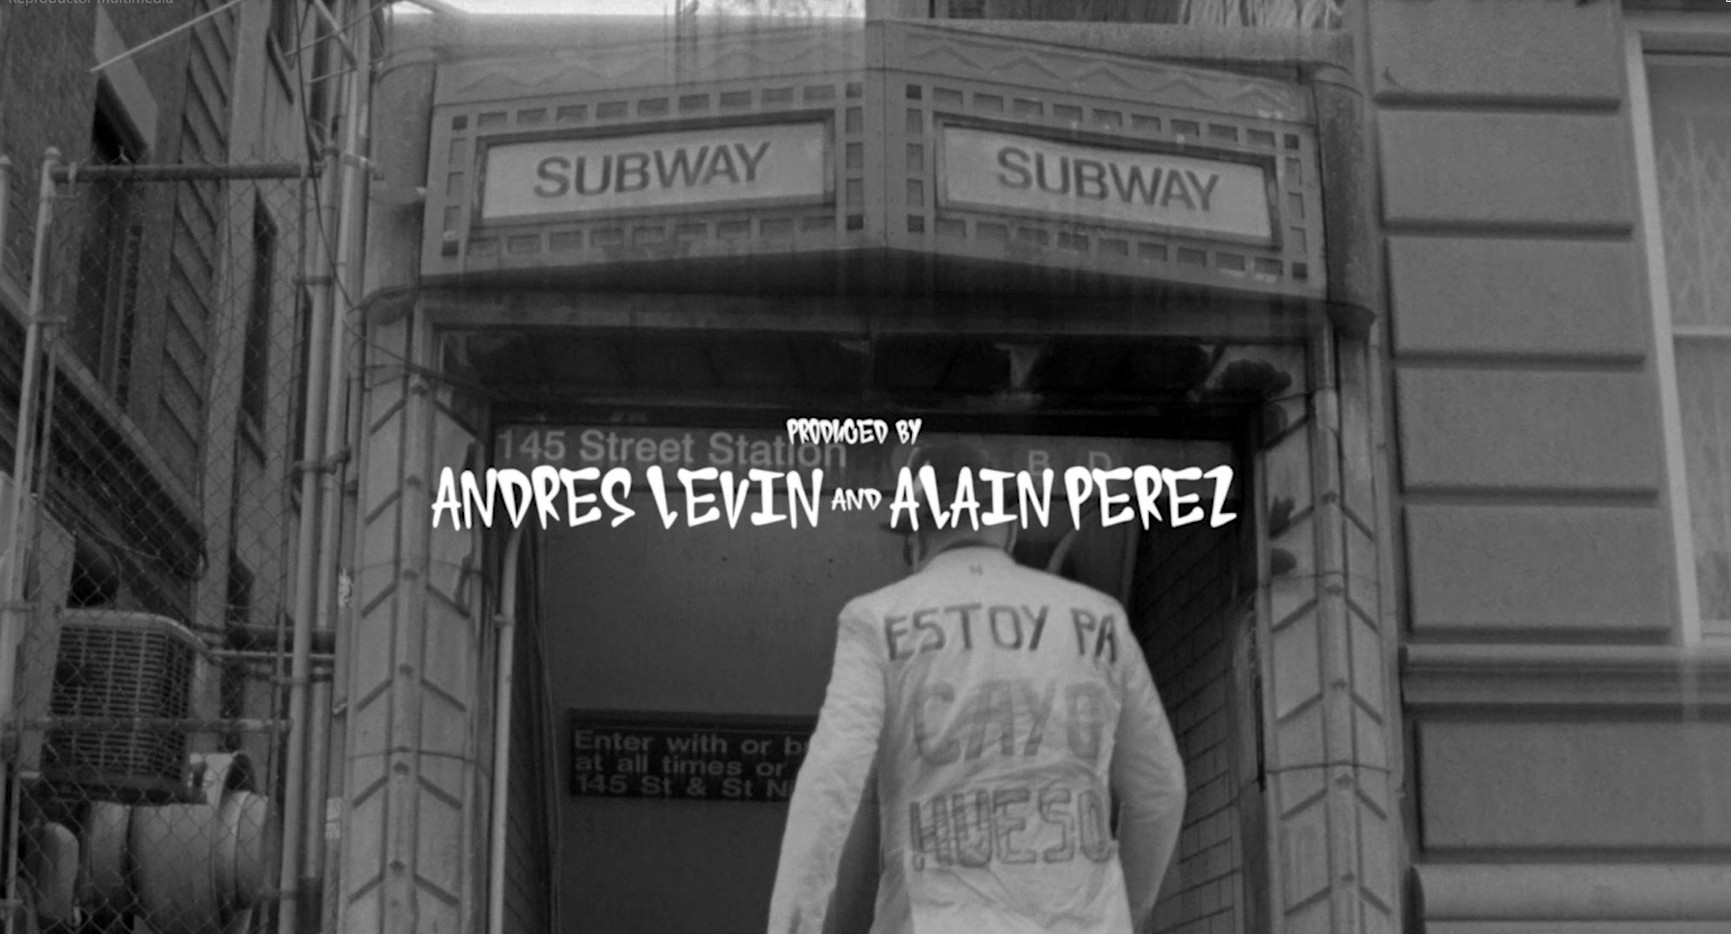 Still from the “Manteca 2.0” video clip. Andrés Levin enters the New York Subway. His jacket says “Estoy pa Cayo Hueso.”